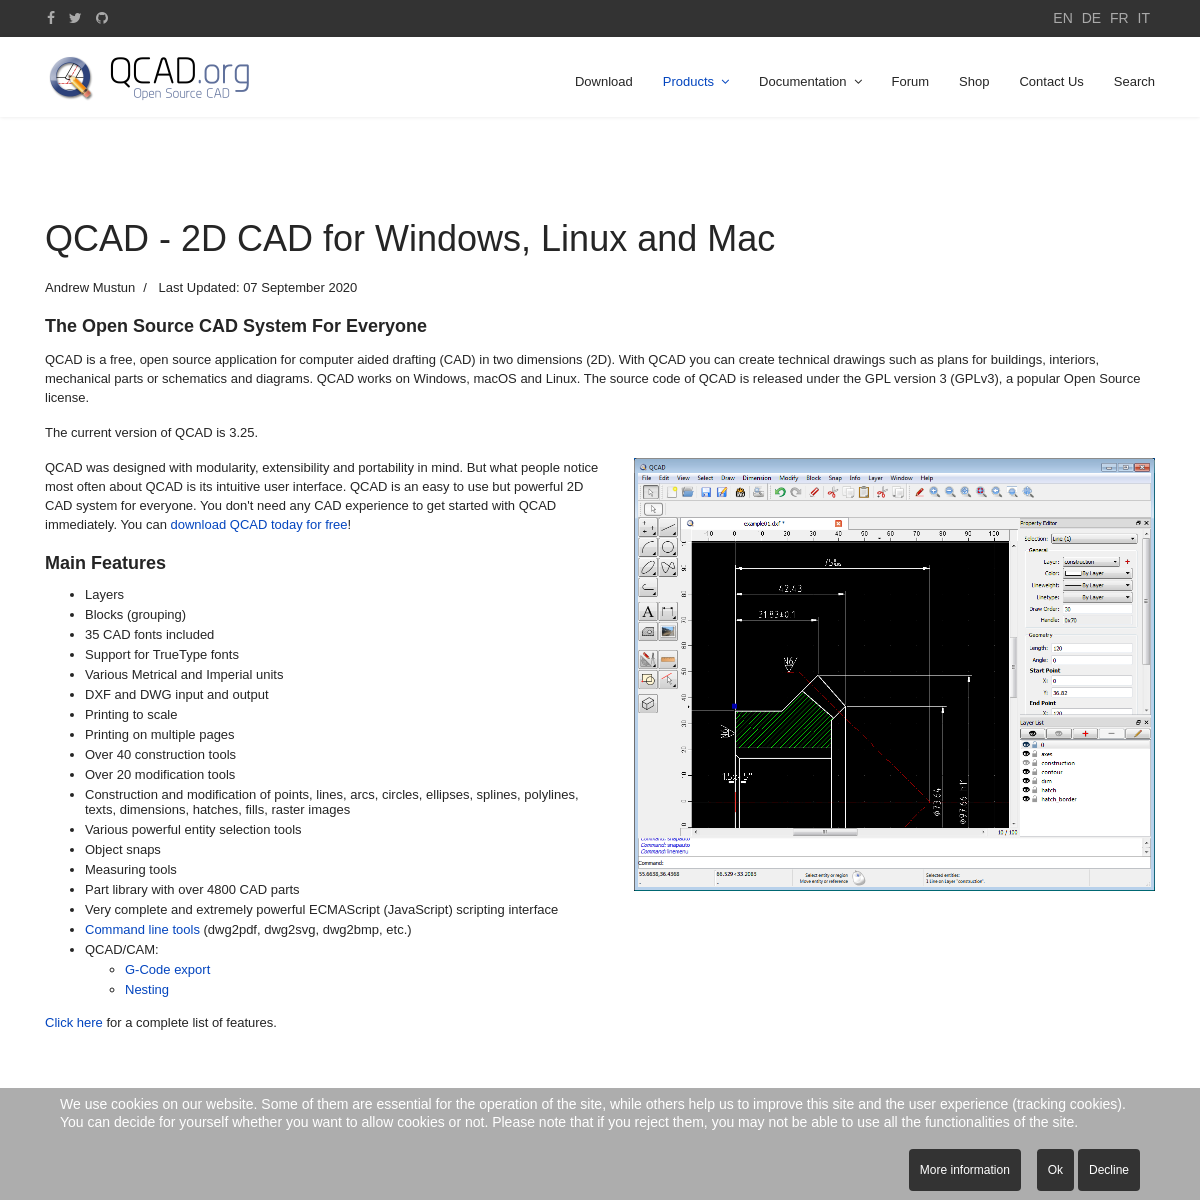 A complete backup of qcad.org